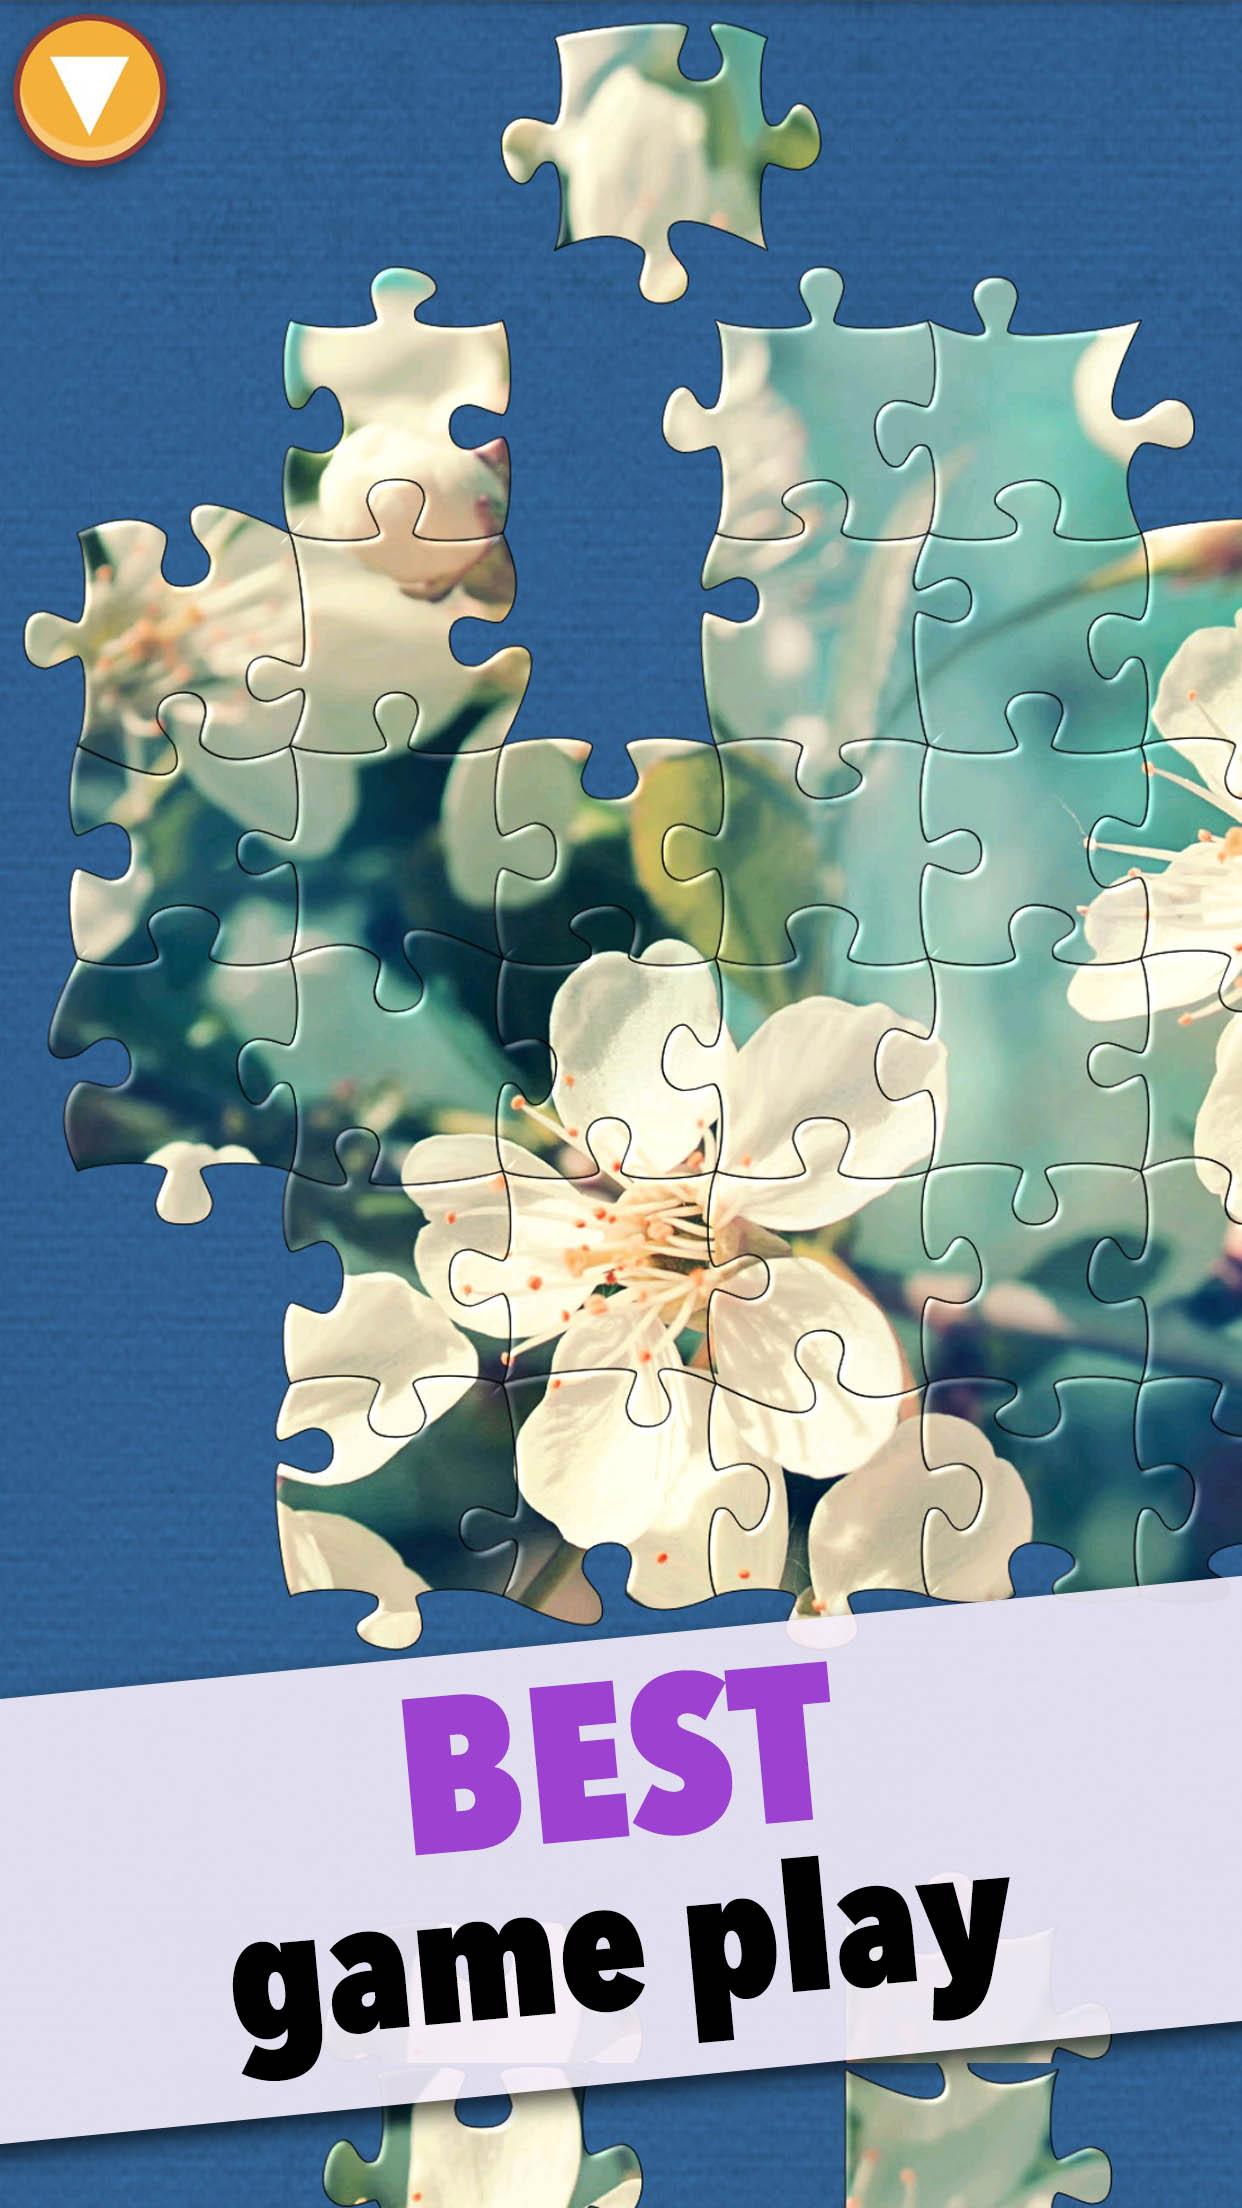 World of Puzzles - best free jigsaw puzzle games 1.16 Screenshot 3